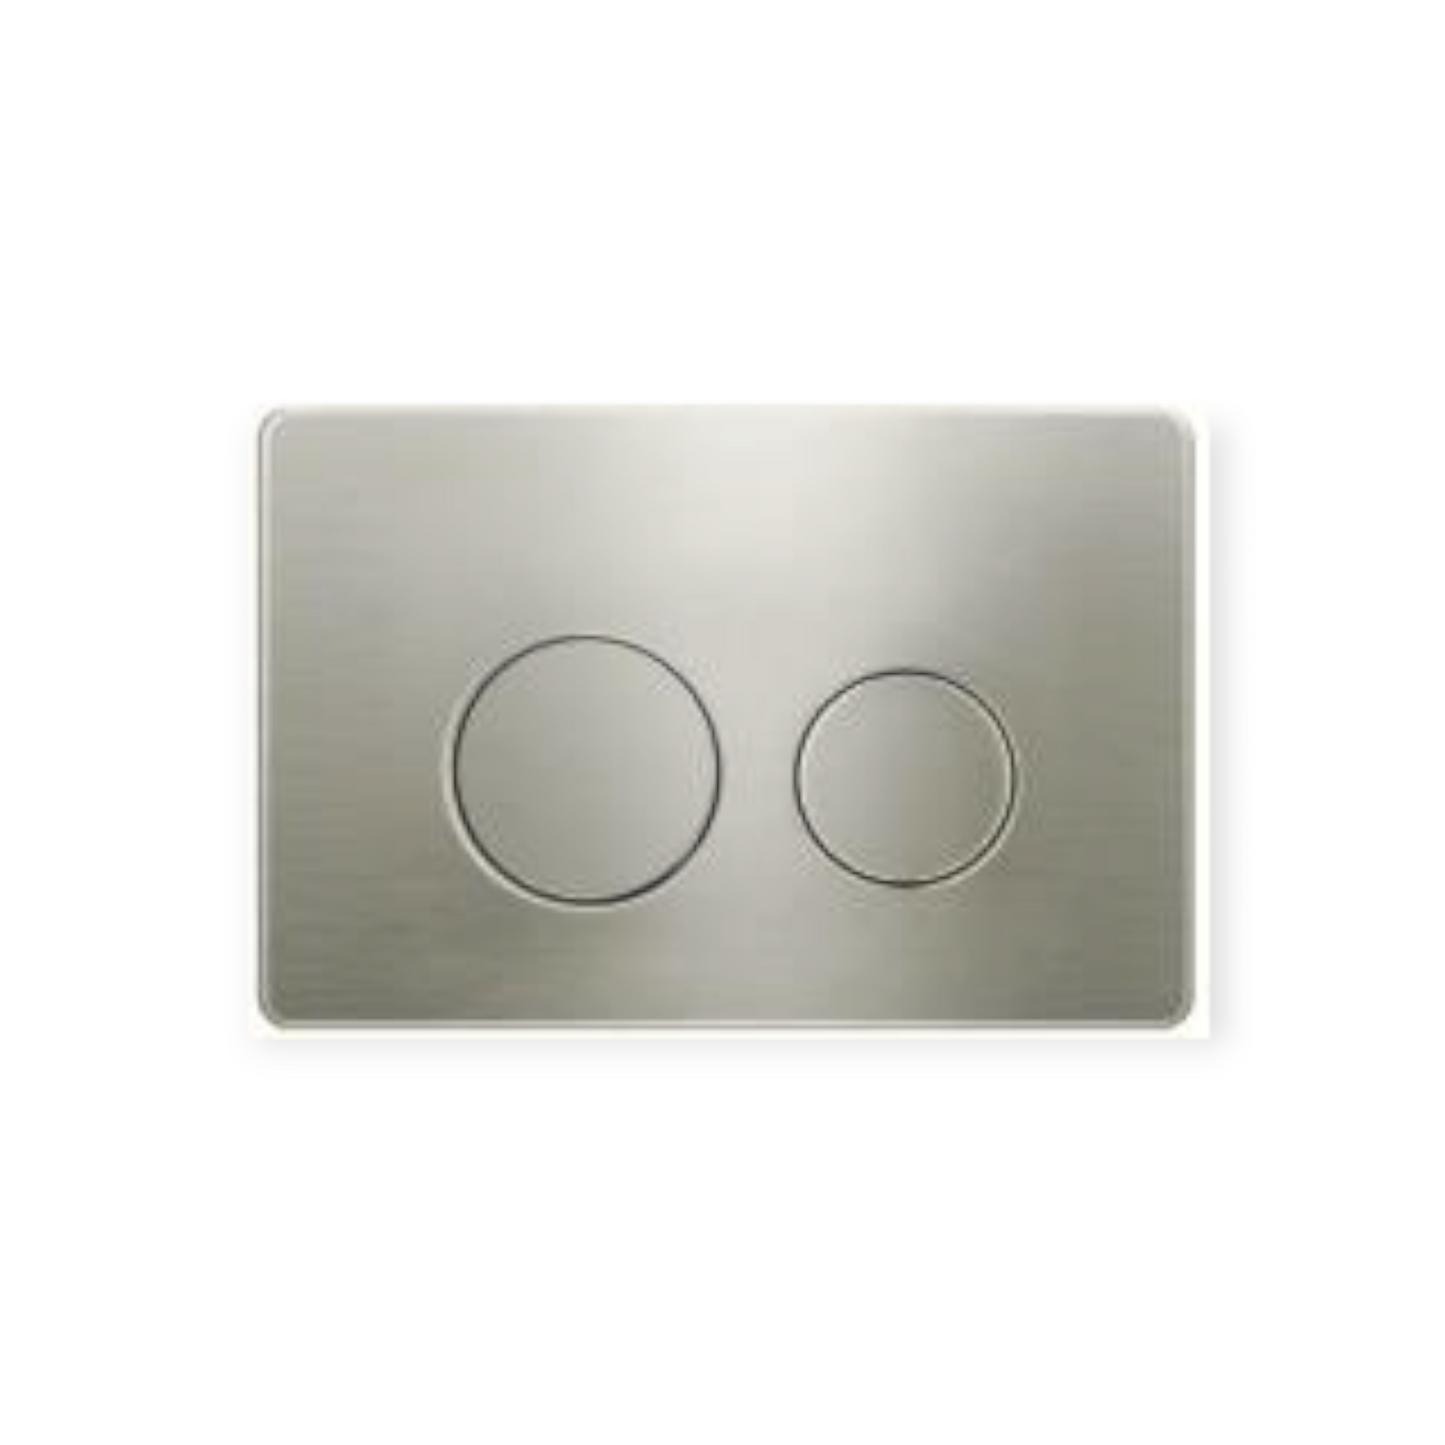 Access Round Button Plate - Brushed Nickel